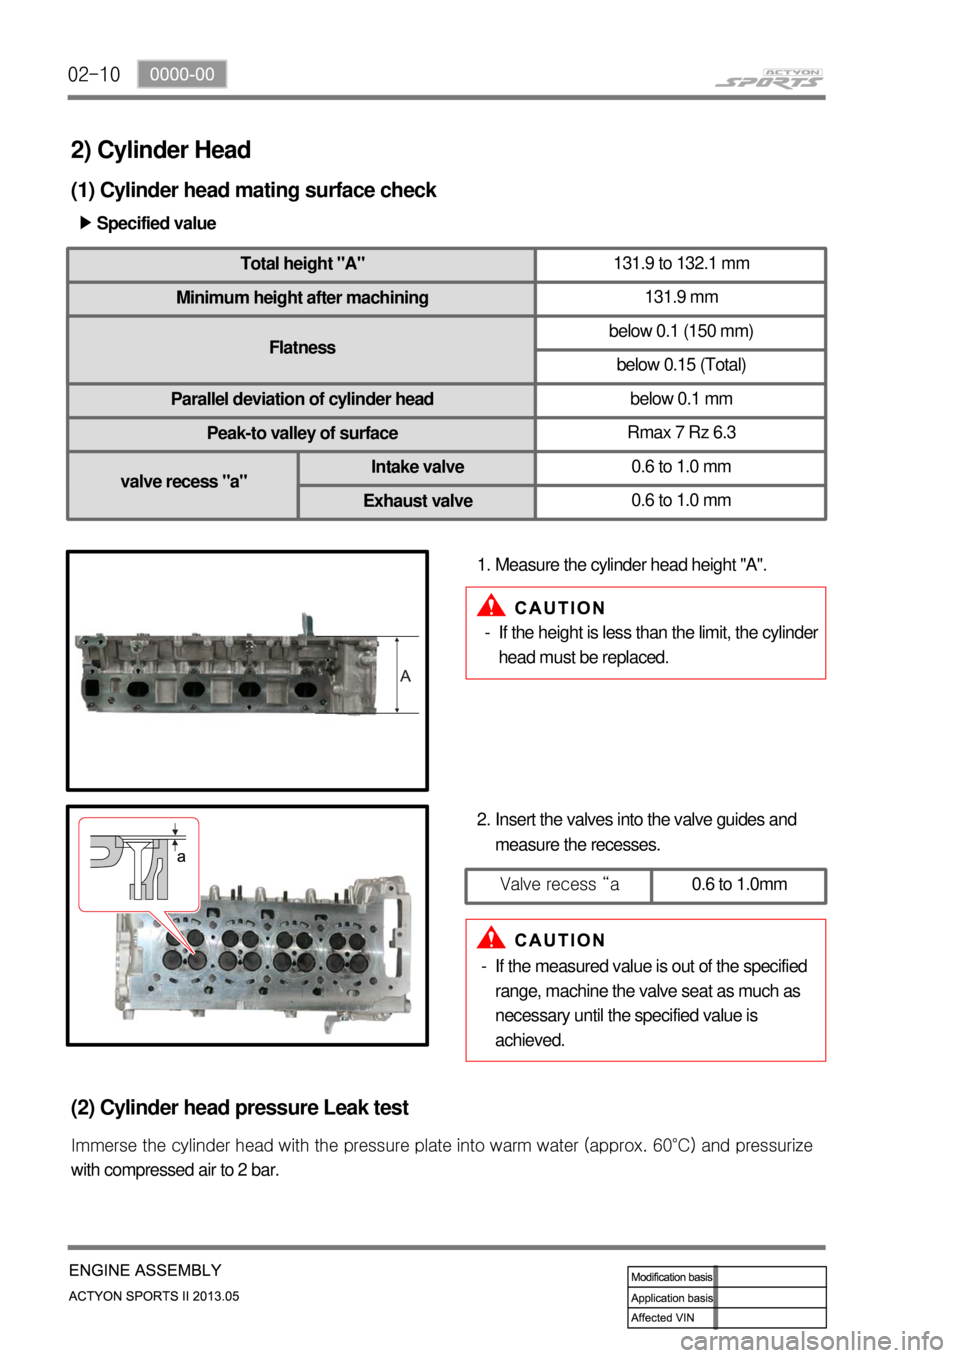 SSANGYONG NEW ACTYON SPORTS 2013  Service Manual 02-10
2) Cylinder Head
(1) Cylinder head mating surface check
Specified value
▶
Total height "A" 131.9 to 132.1 mm
Minimum height after machining 131.9 mm
Flatness Longitudinal direction
below 0.1 (